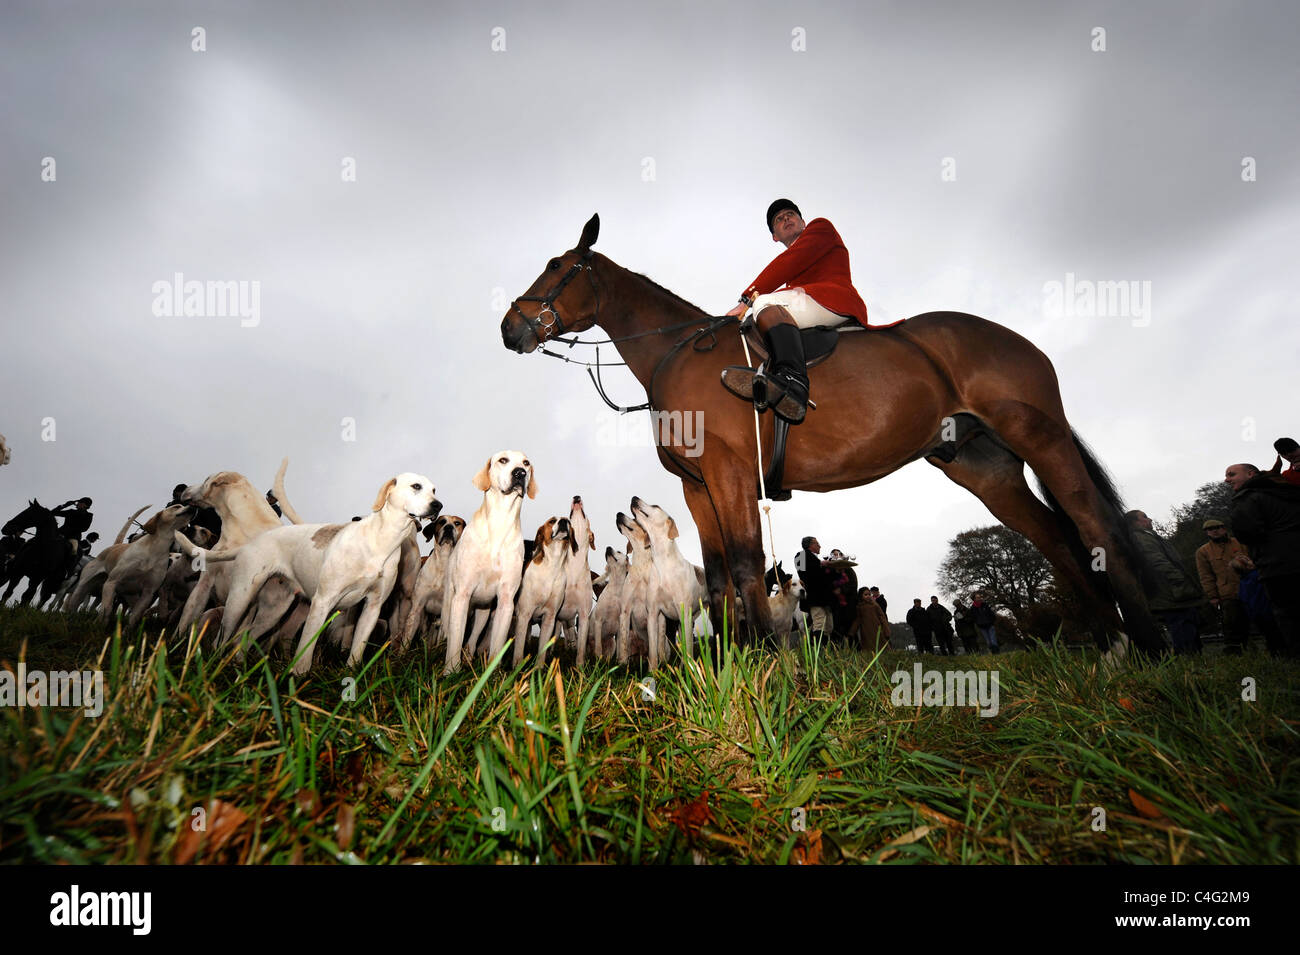 A Cotswold Hunt meeting at Spoonley Farm near Winchcombe, Gloucestershire Nov 2008 Stock Photo